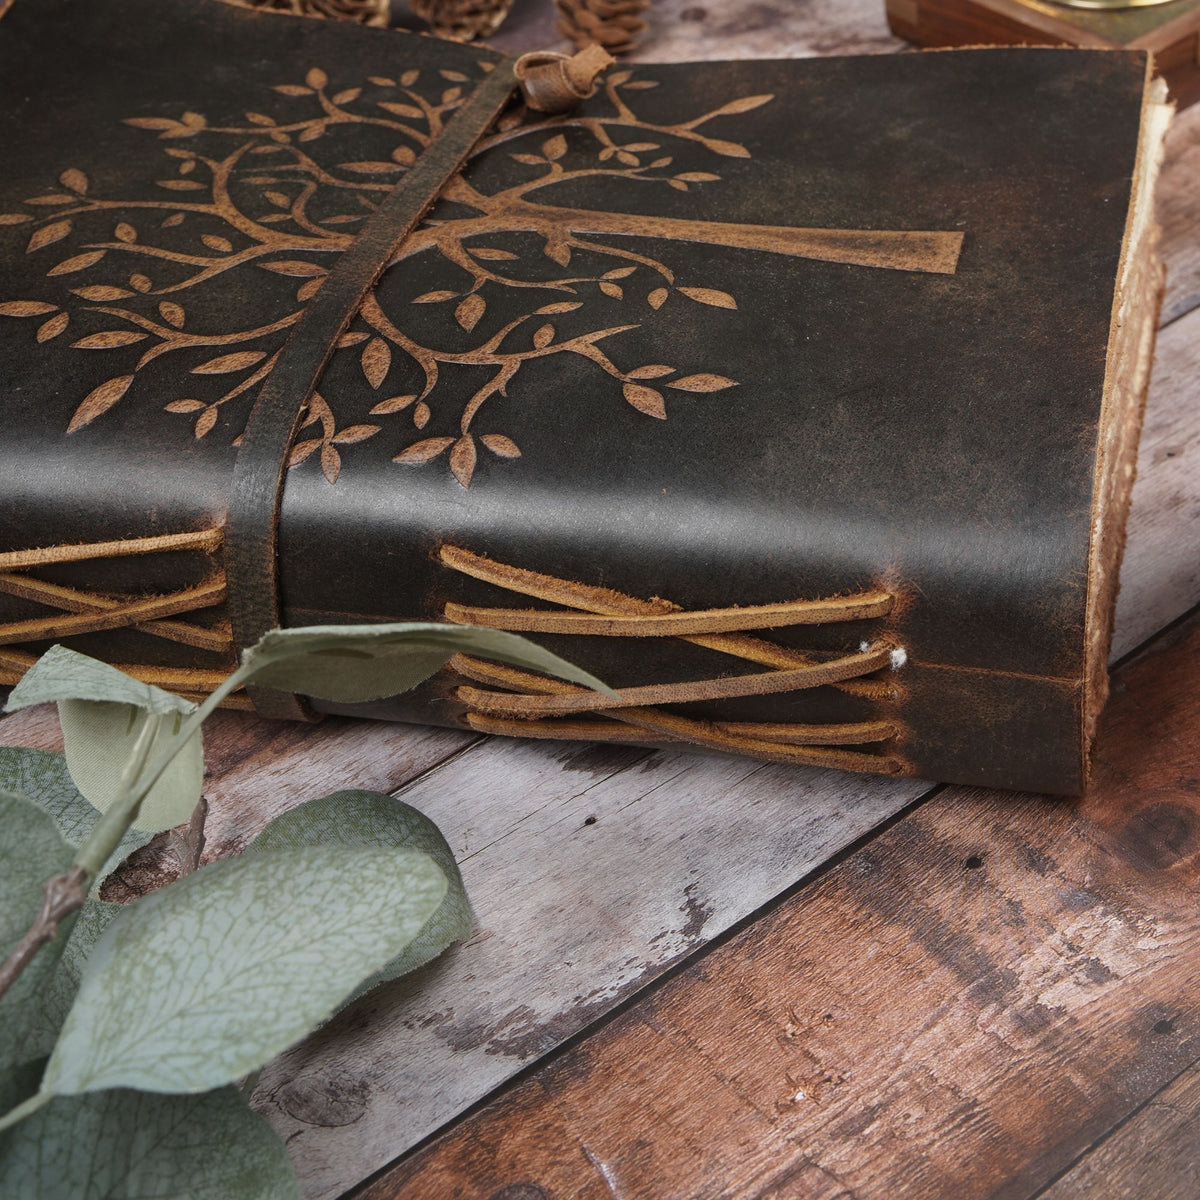 TREE OF LIFE JOURNAL - LINED PAPER VINTAGE LEATHER JOURNAL